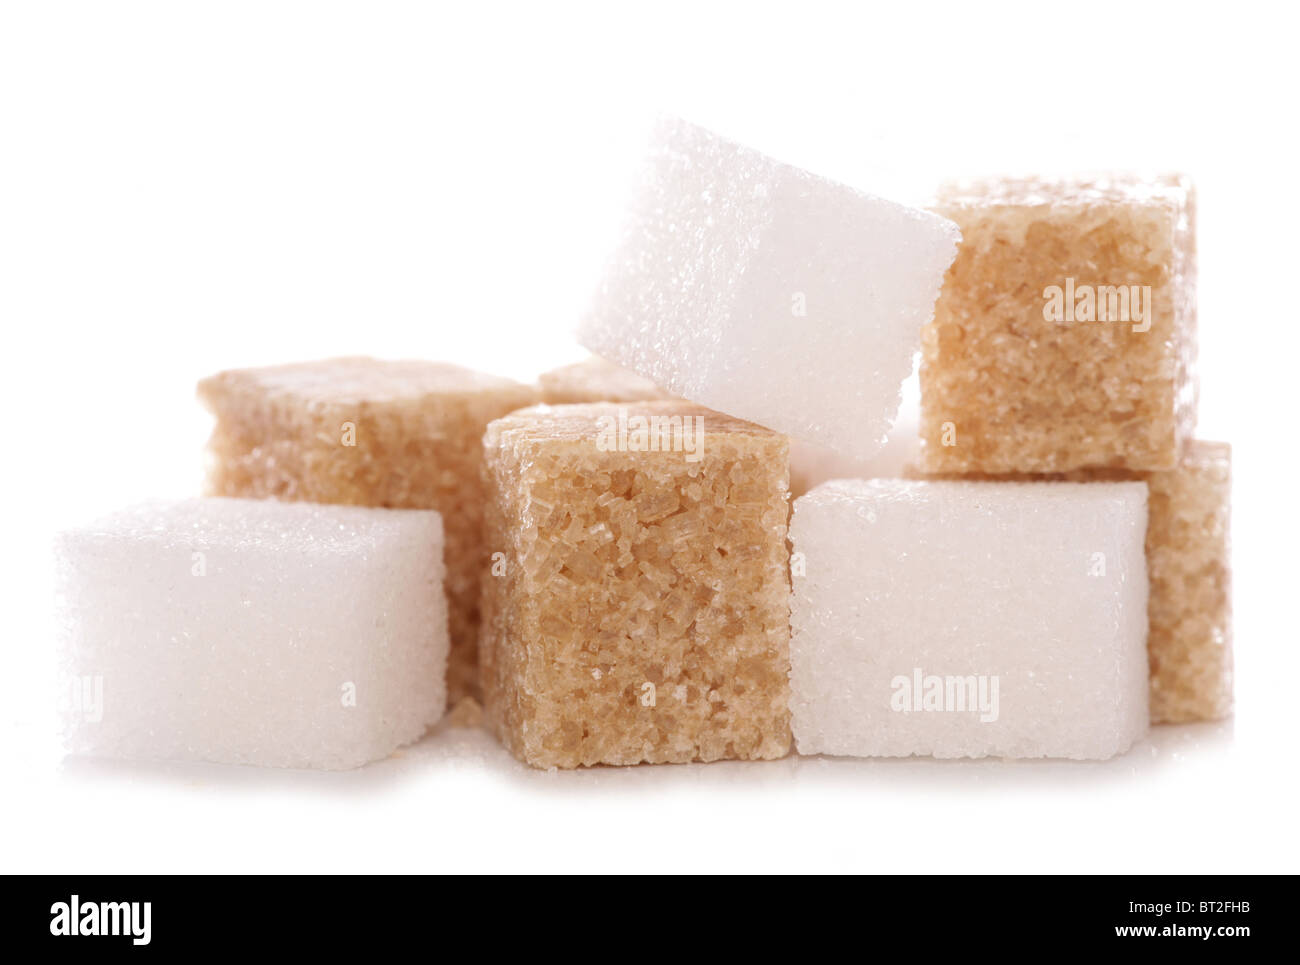 Mixture of brown and white sugar cubes studio cutout Stock Photo